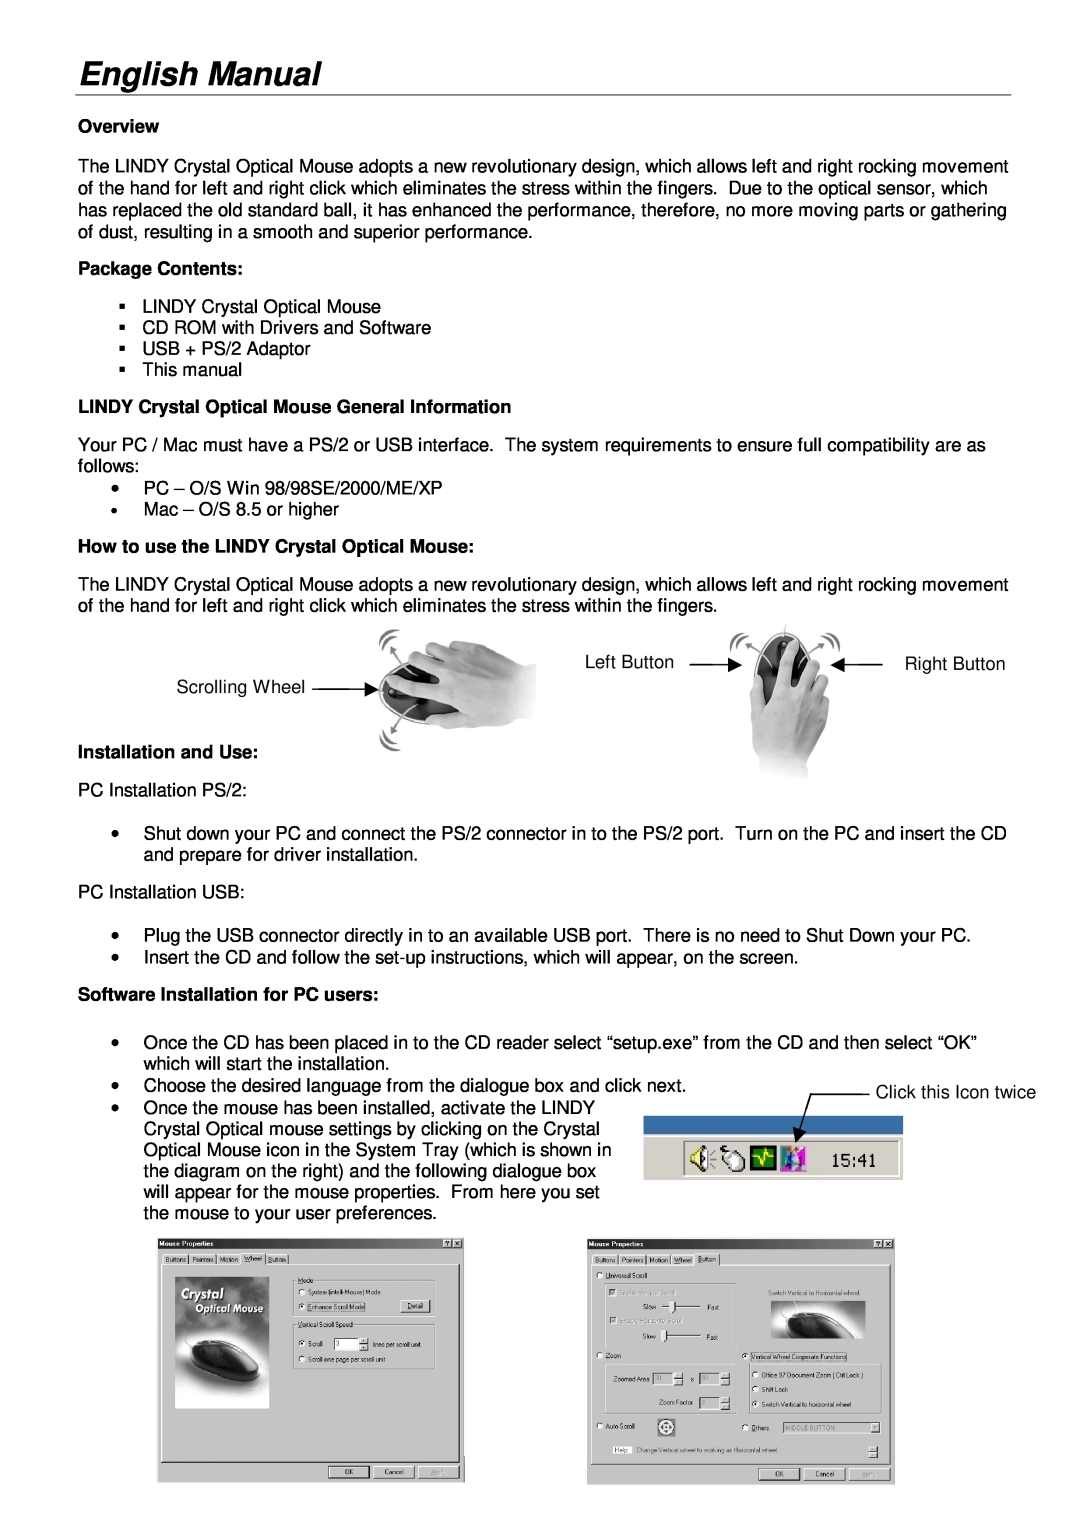 Lindy 20599 manual English Manual, Overview, Package Contents, LINDY Crystal Optical Mouse General Information 